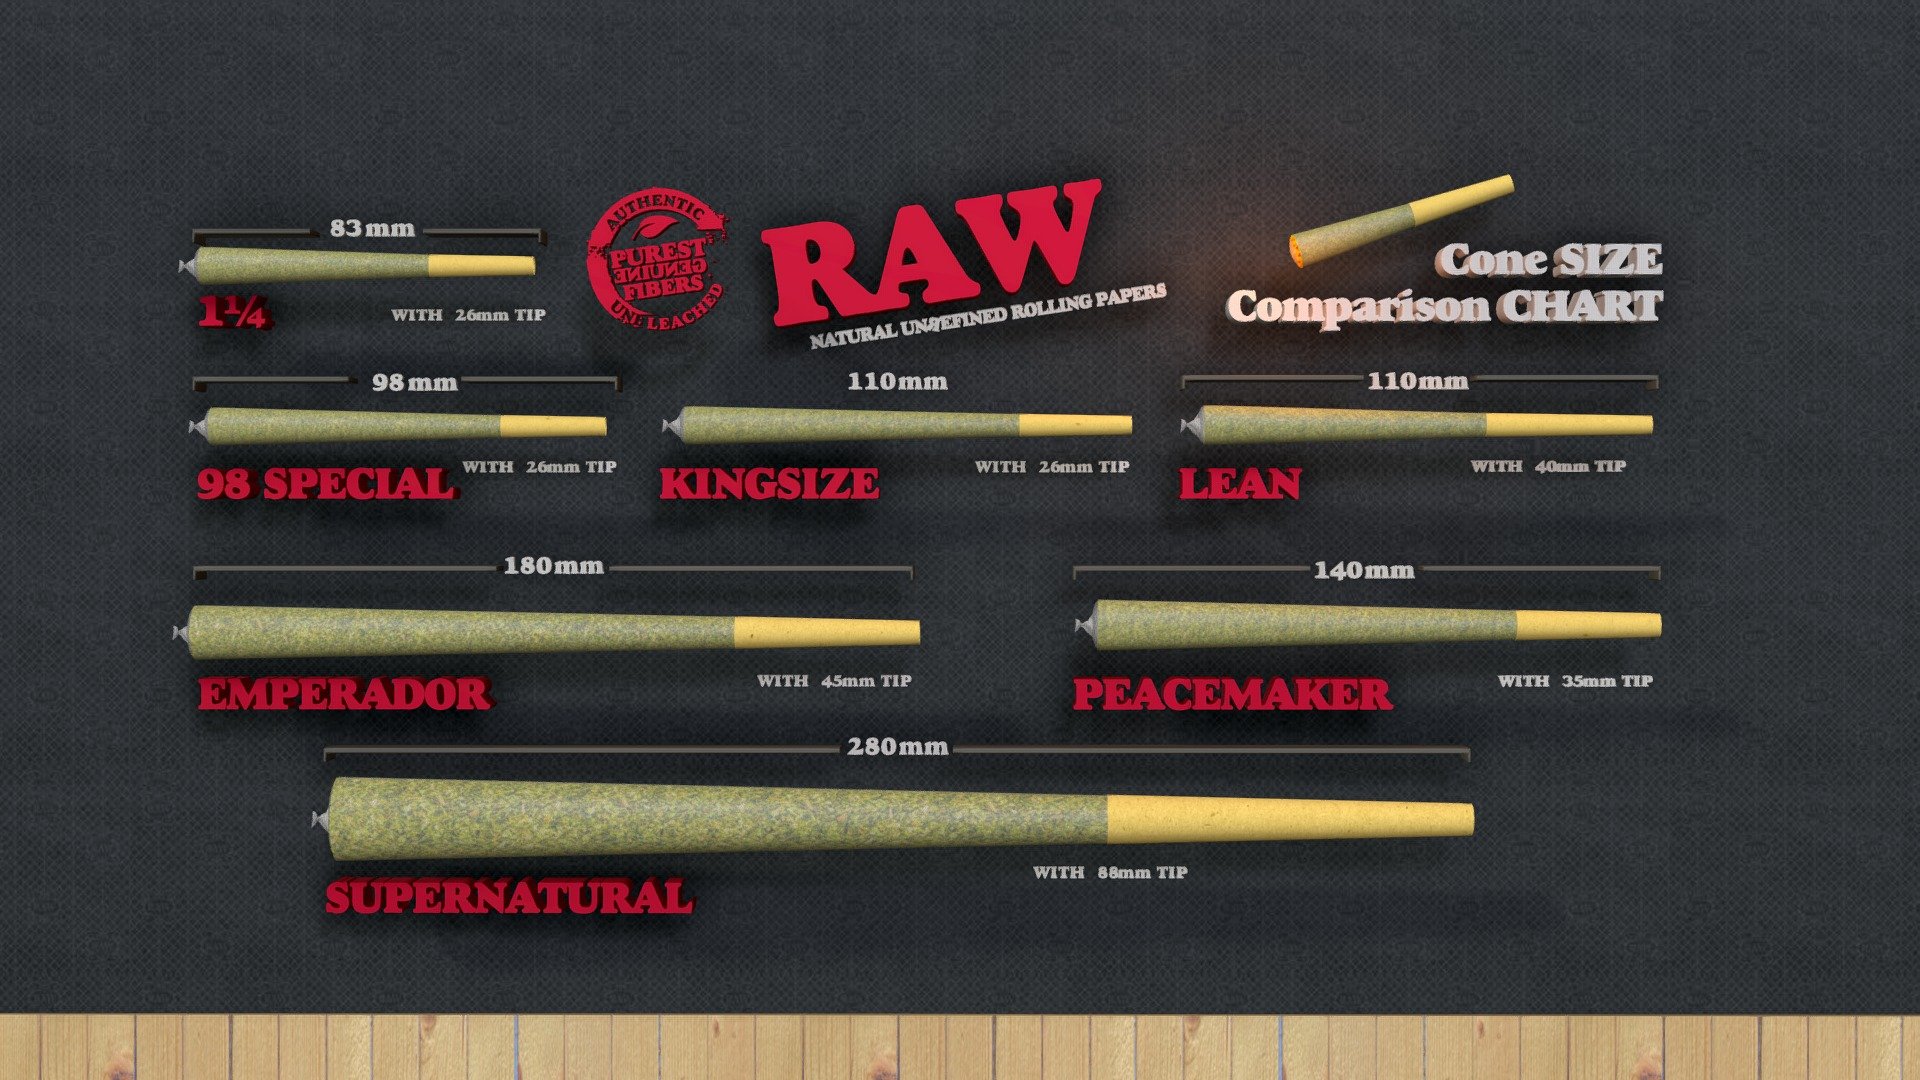 Classic Cone Size Chart created in full 3D. Use these cones for any character or scene. 
Includes all sizes : 1 1/4, 98 special, Kingsize, Lean, Emperador, Peacemaker, Supernatural. + Scene Elements. 

Great for PFPs.

Textures Included 3d model